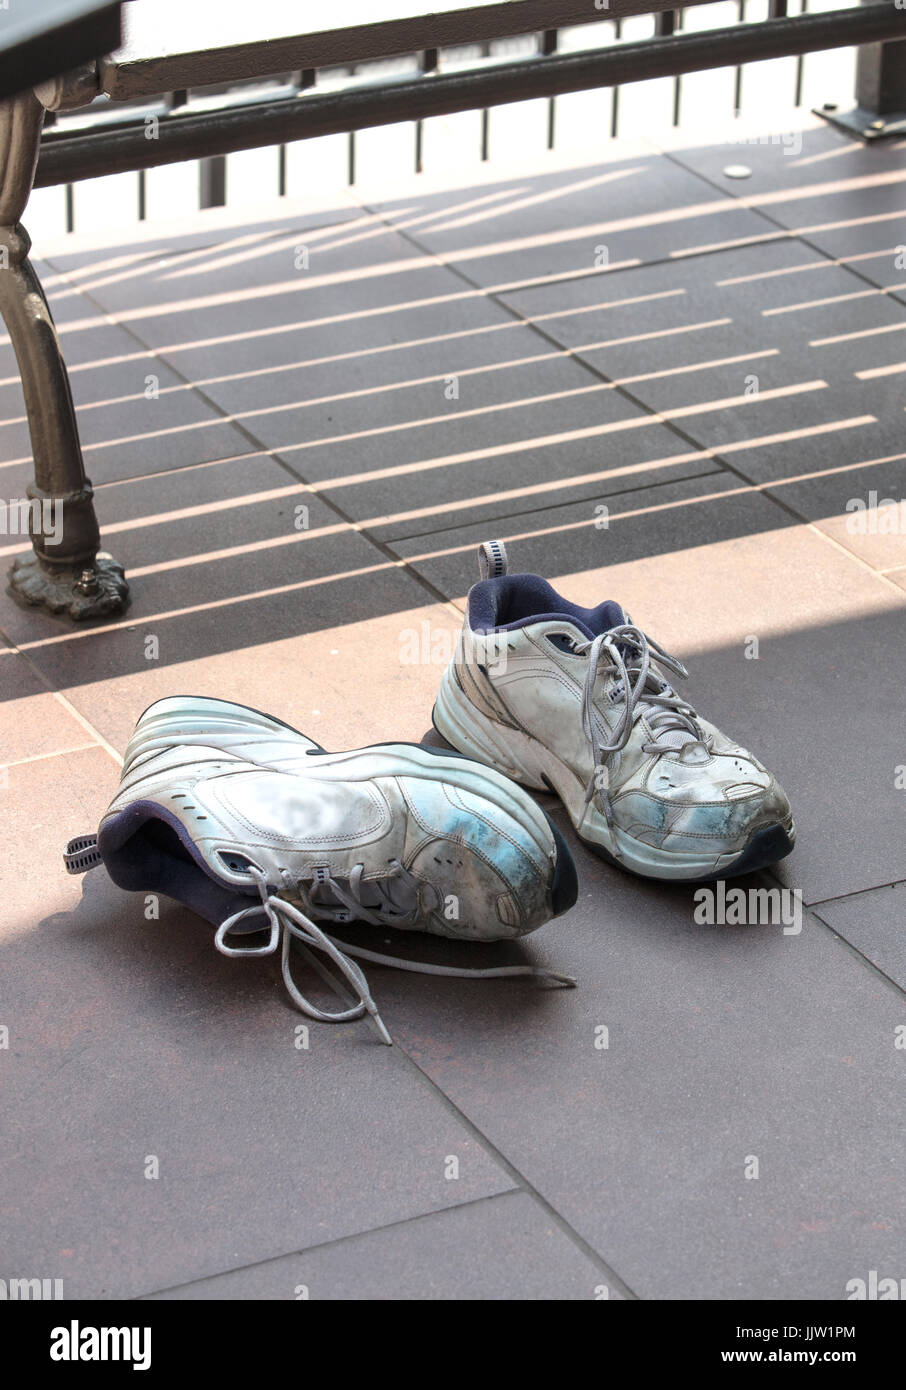 A pair of old and used running shoes laying on a tiled concrete street floor next to a bench Stock Photo